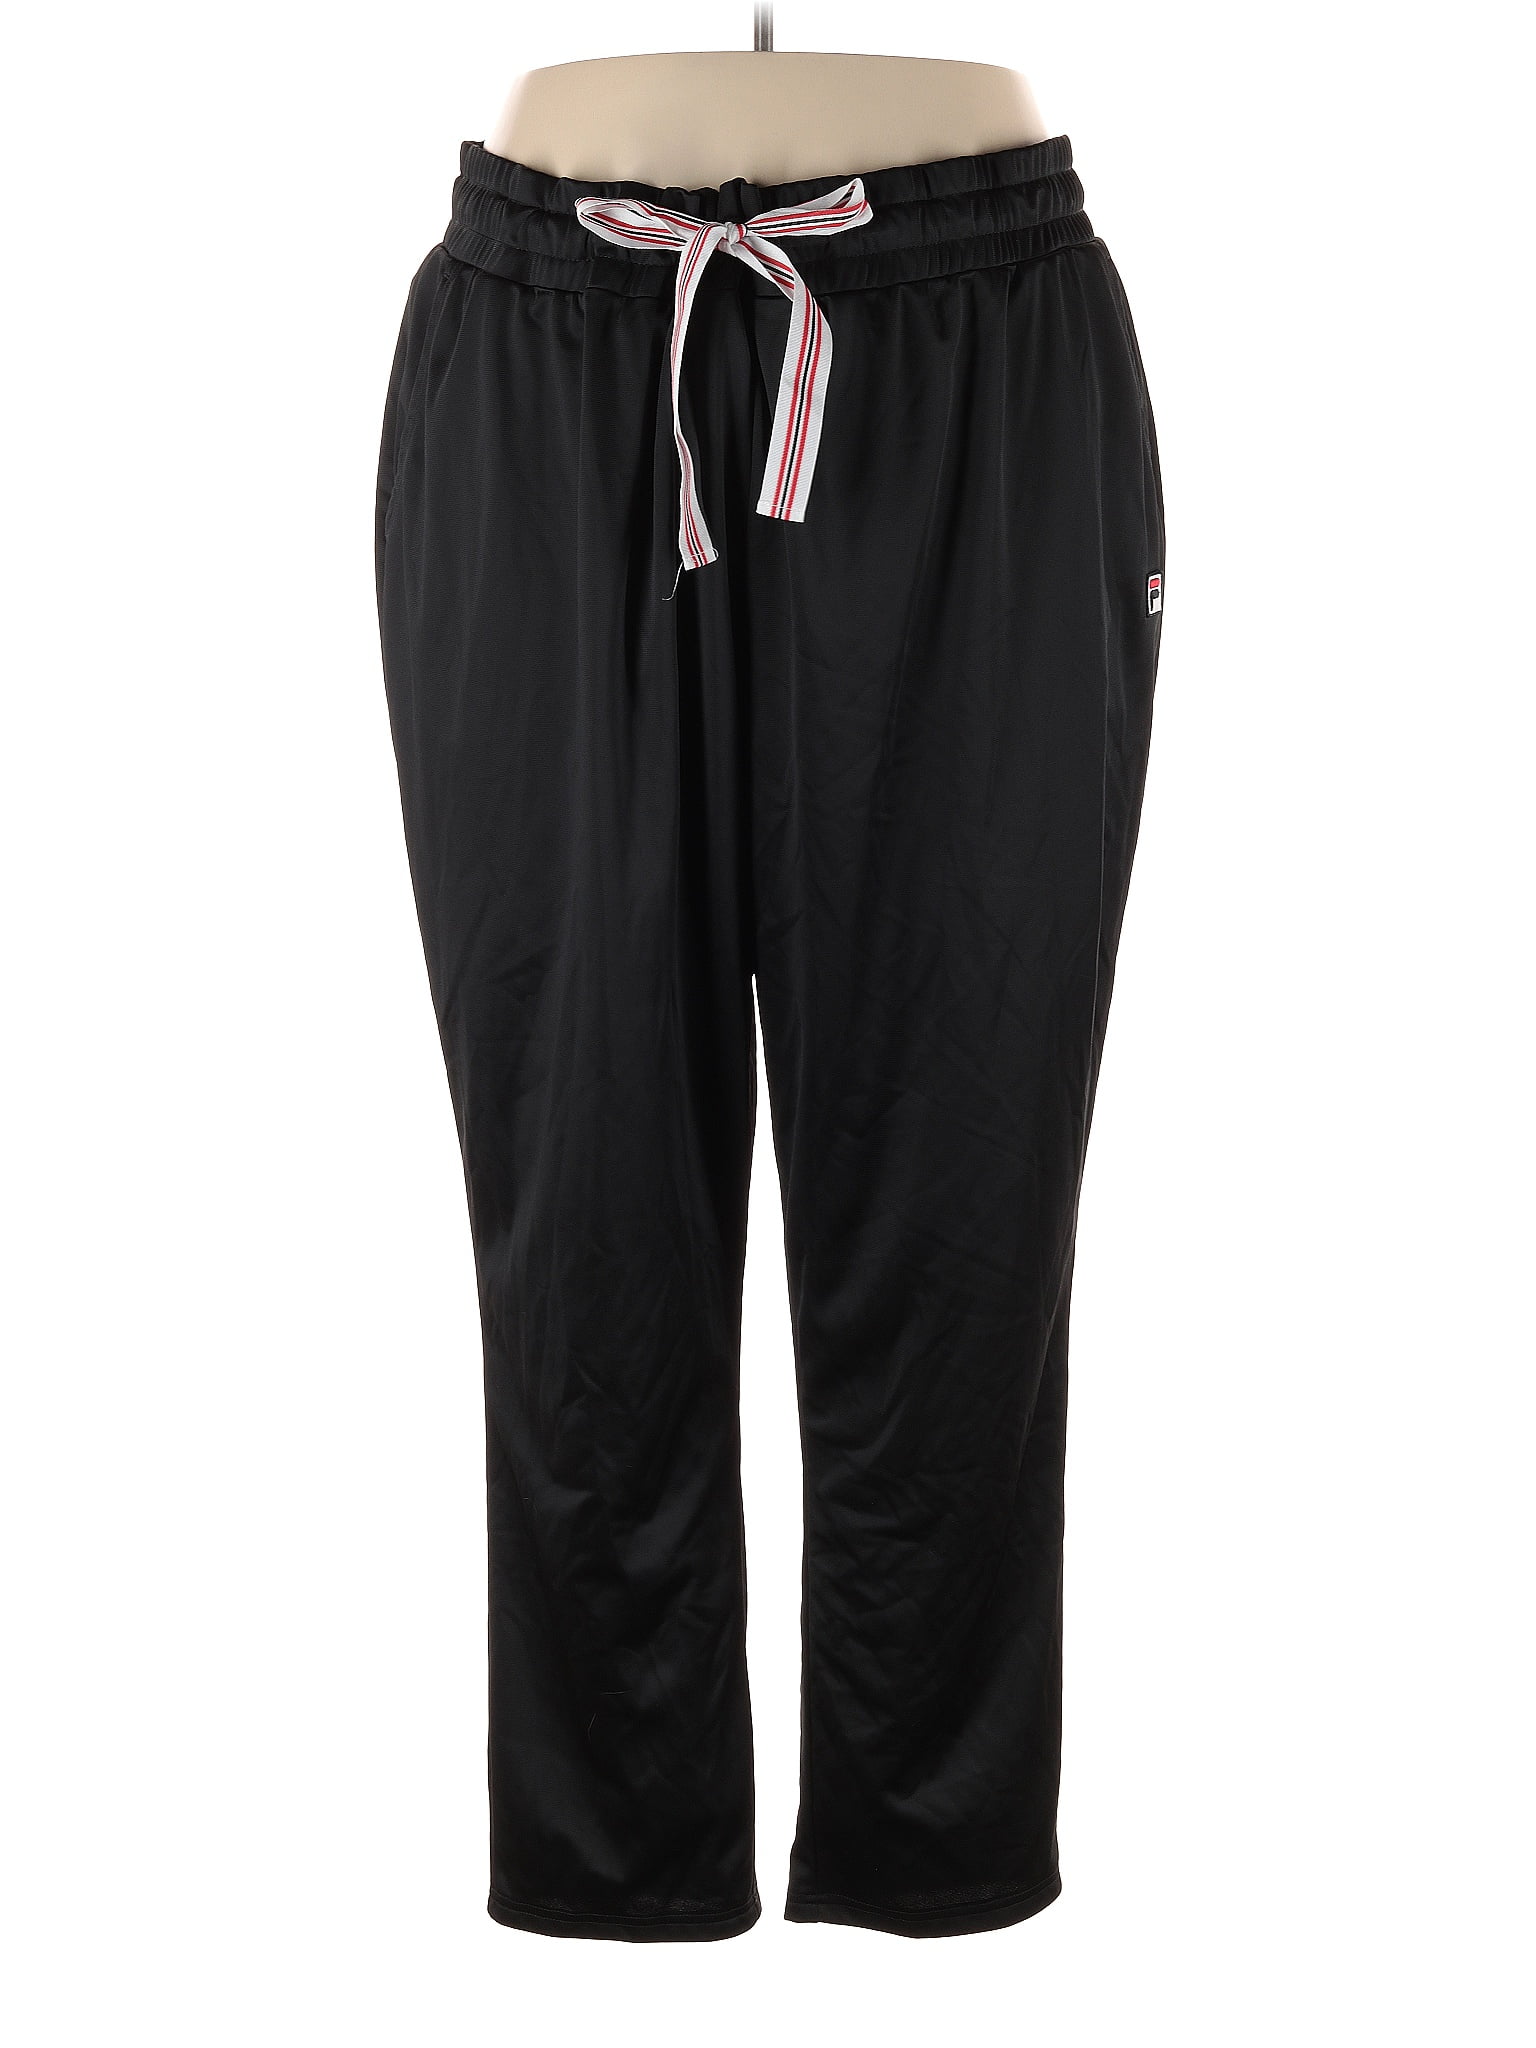 FILA 100% Polyester Solid Black Track Pants Size 3X (Plus) - 66% off